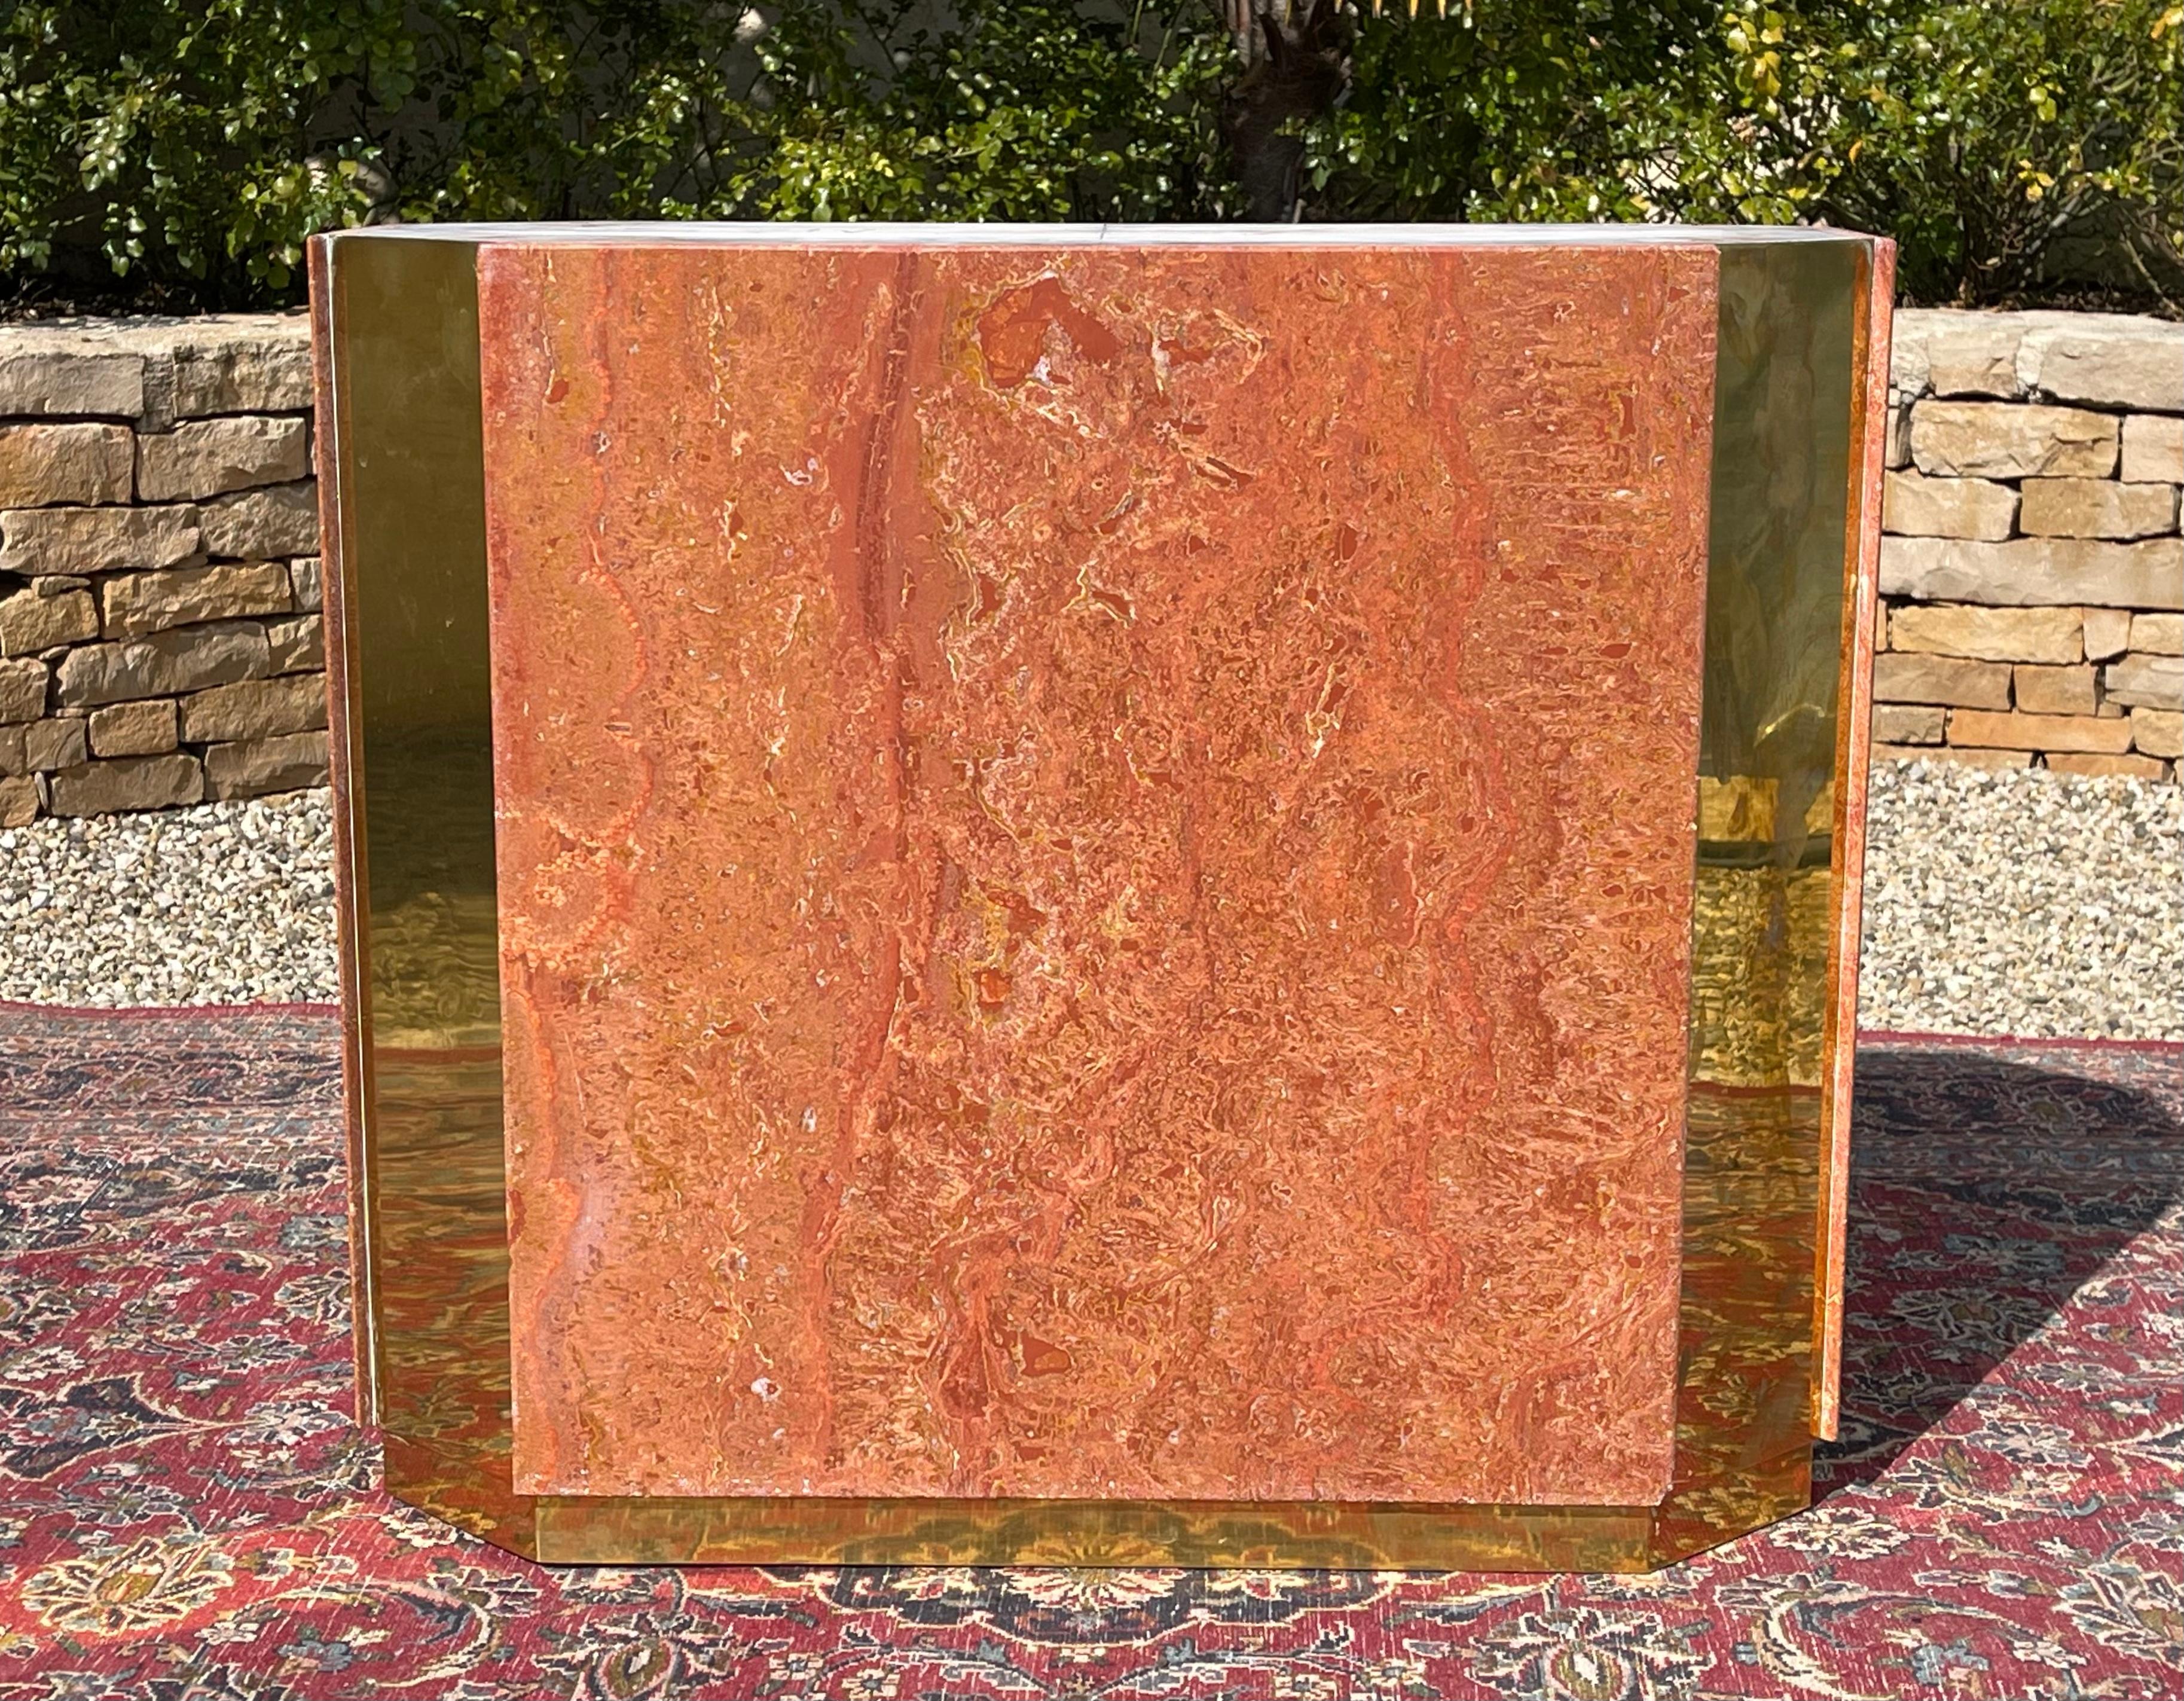 Superb rectangular table with cut sides resting on a central foot in red marble from Iran. Golden brass frame around the top and on the foot. This table is signed on the foot and is in good condition. Circa 1970/1980.
Thickness of the top: 4.5cm.